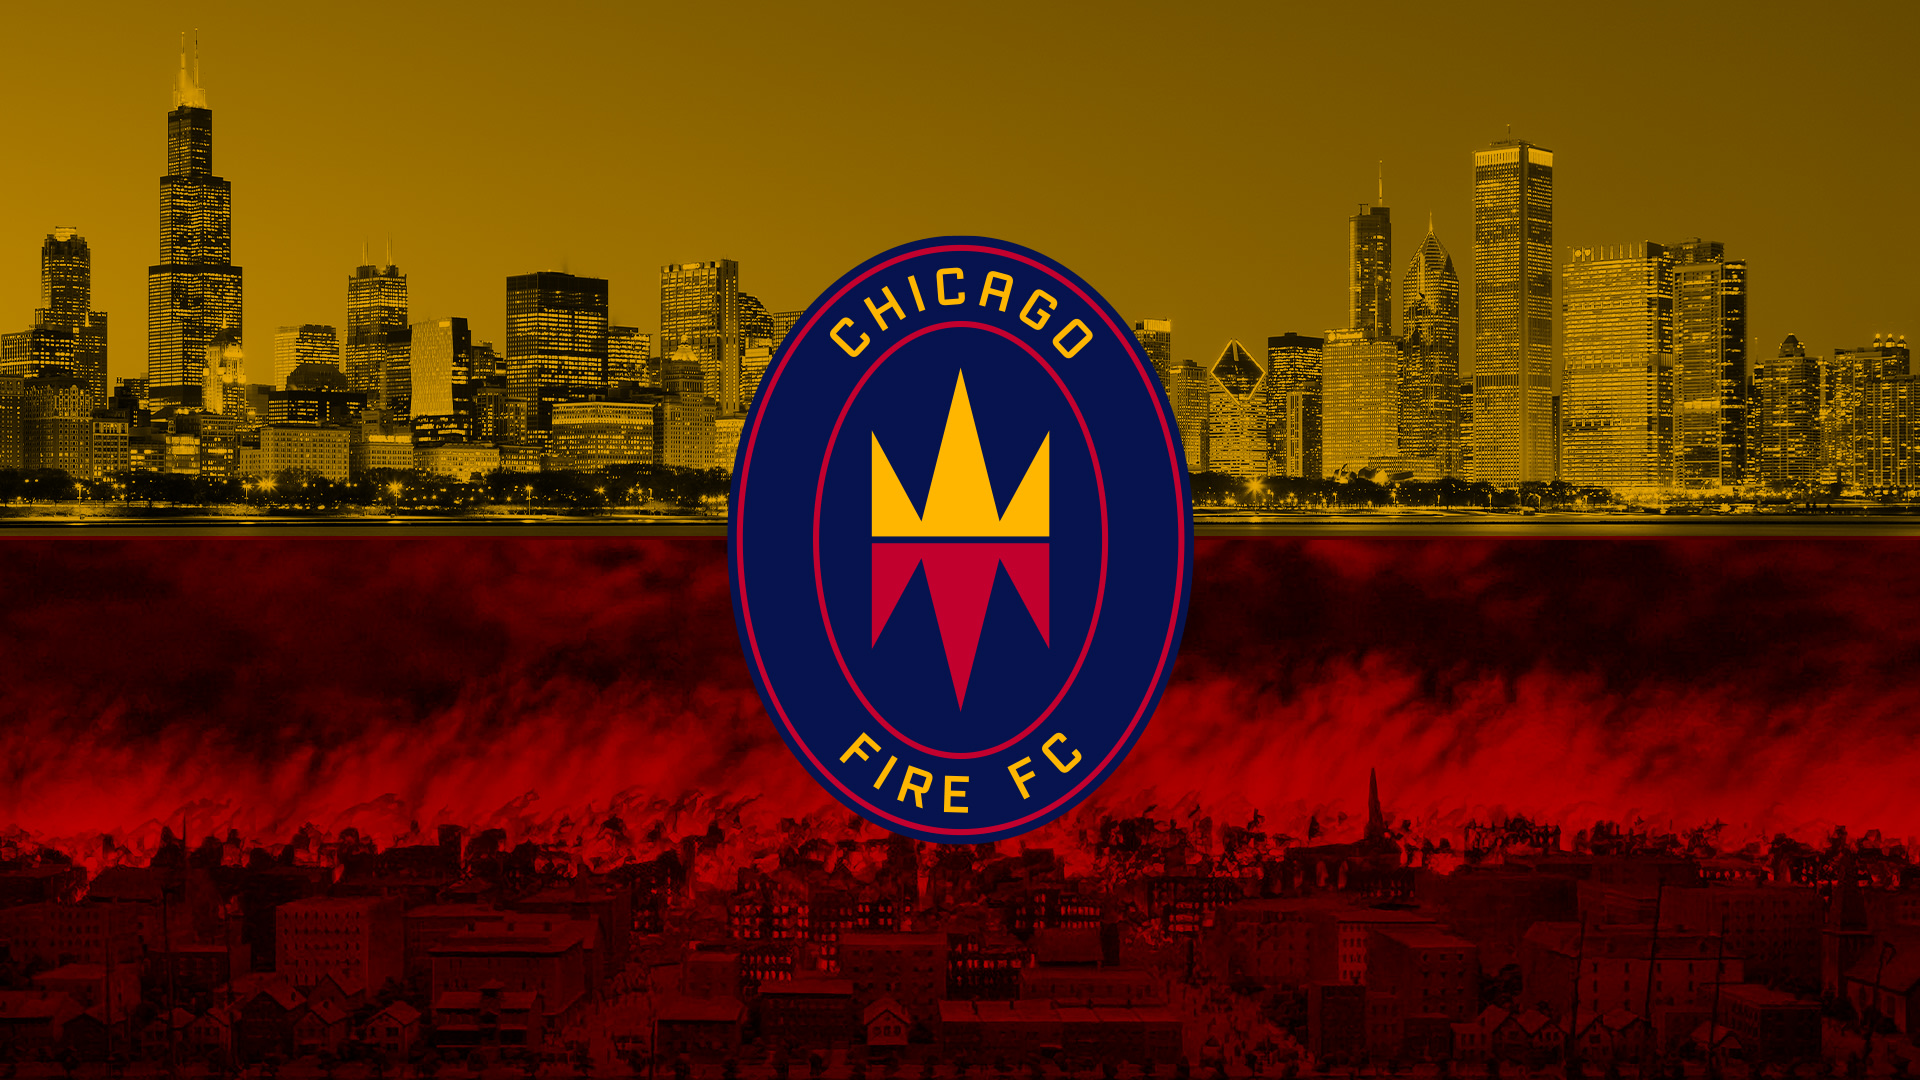 Chicago Fire FC unveil new badge brand identity inspired by the